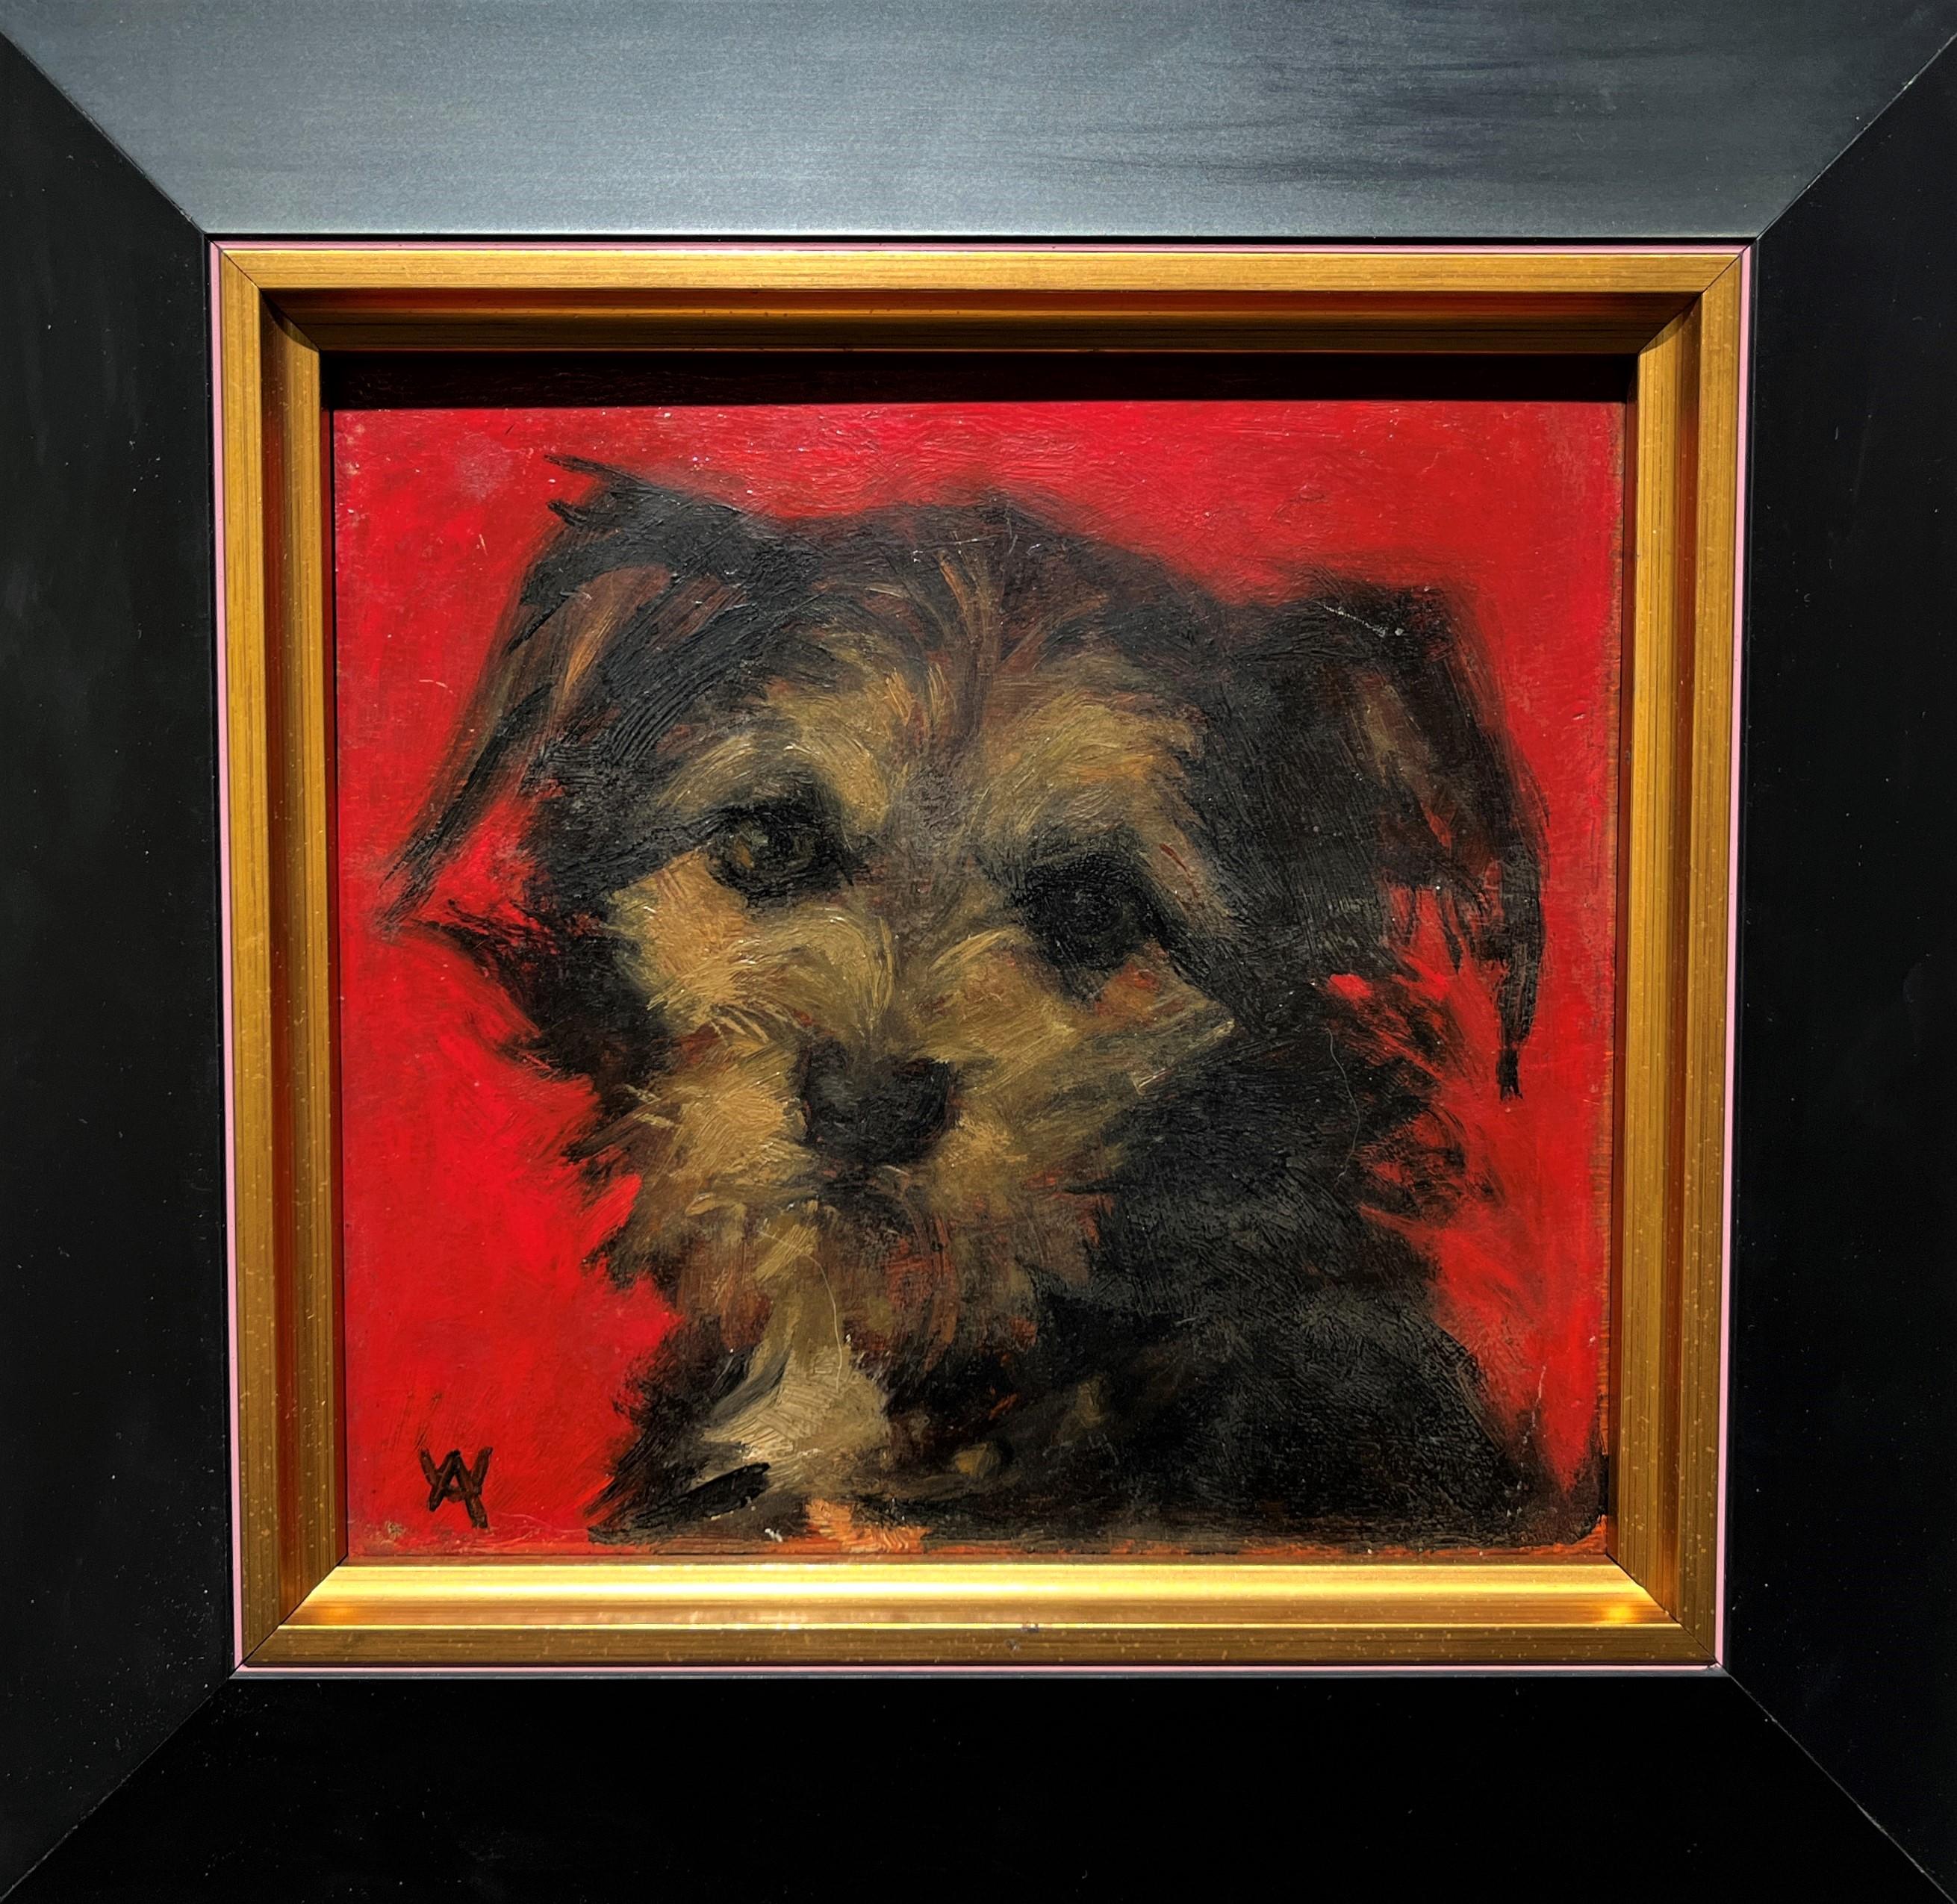 Unknown Portrait Painting - Antique Painting of a Dog: "Red Terrier" circa 1910, European School